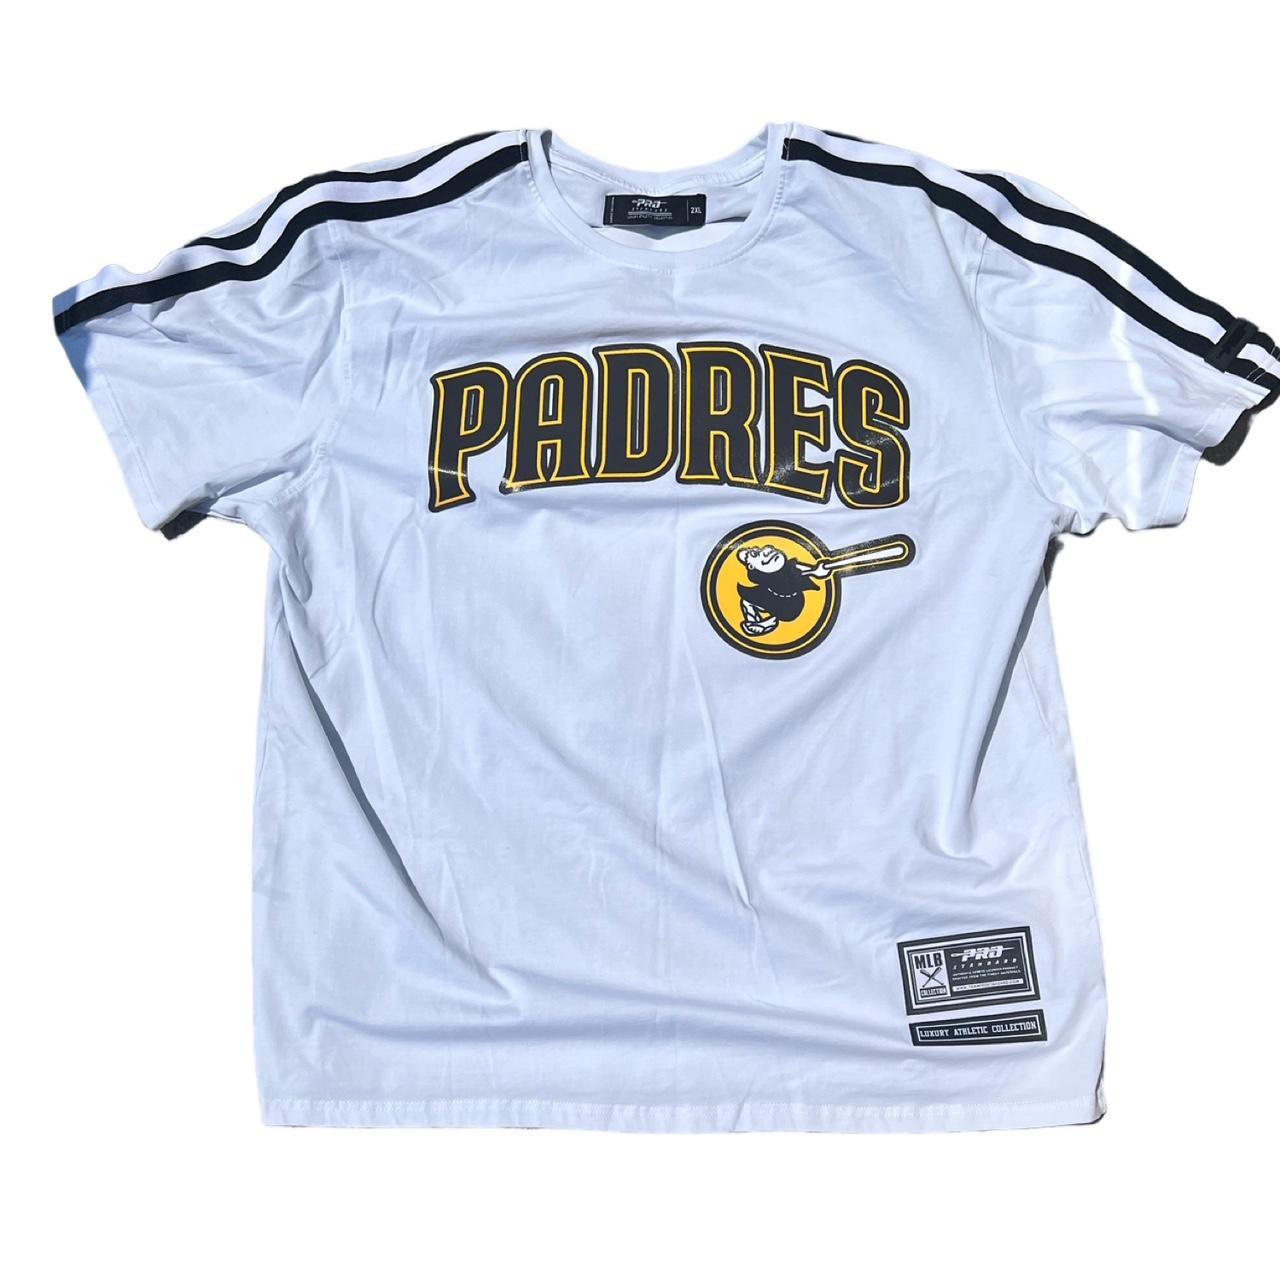 Yellow San Diego Padres MLB Jerseys for sale